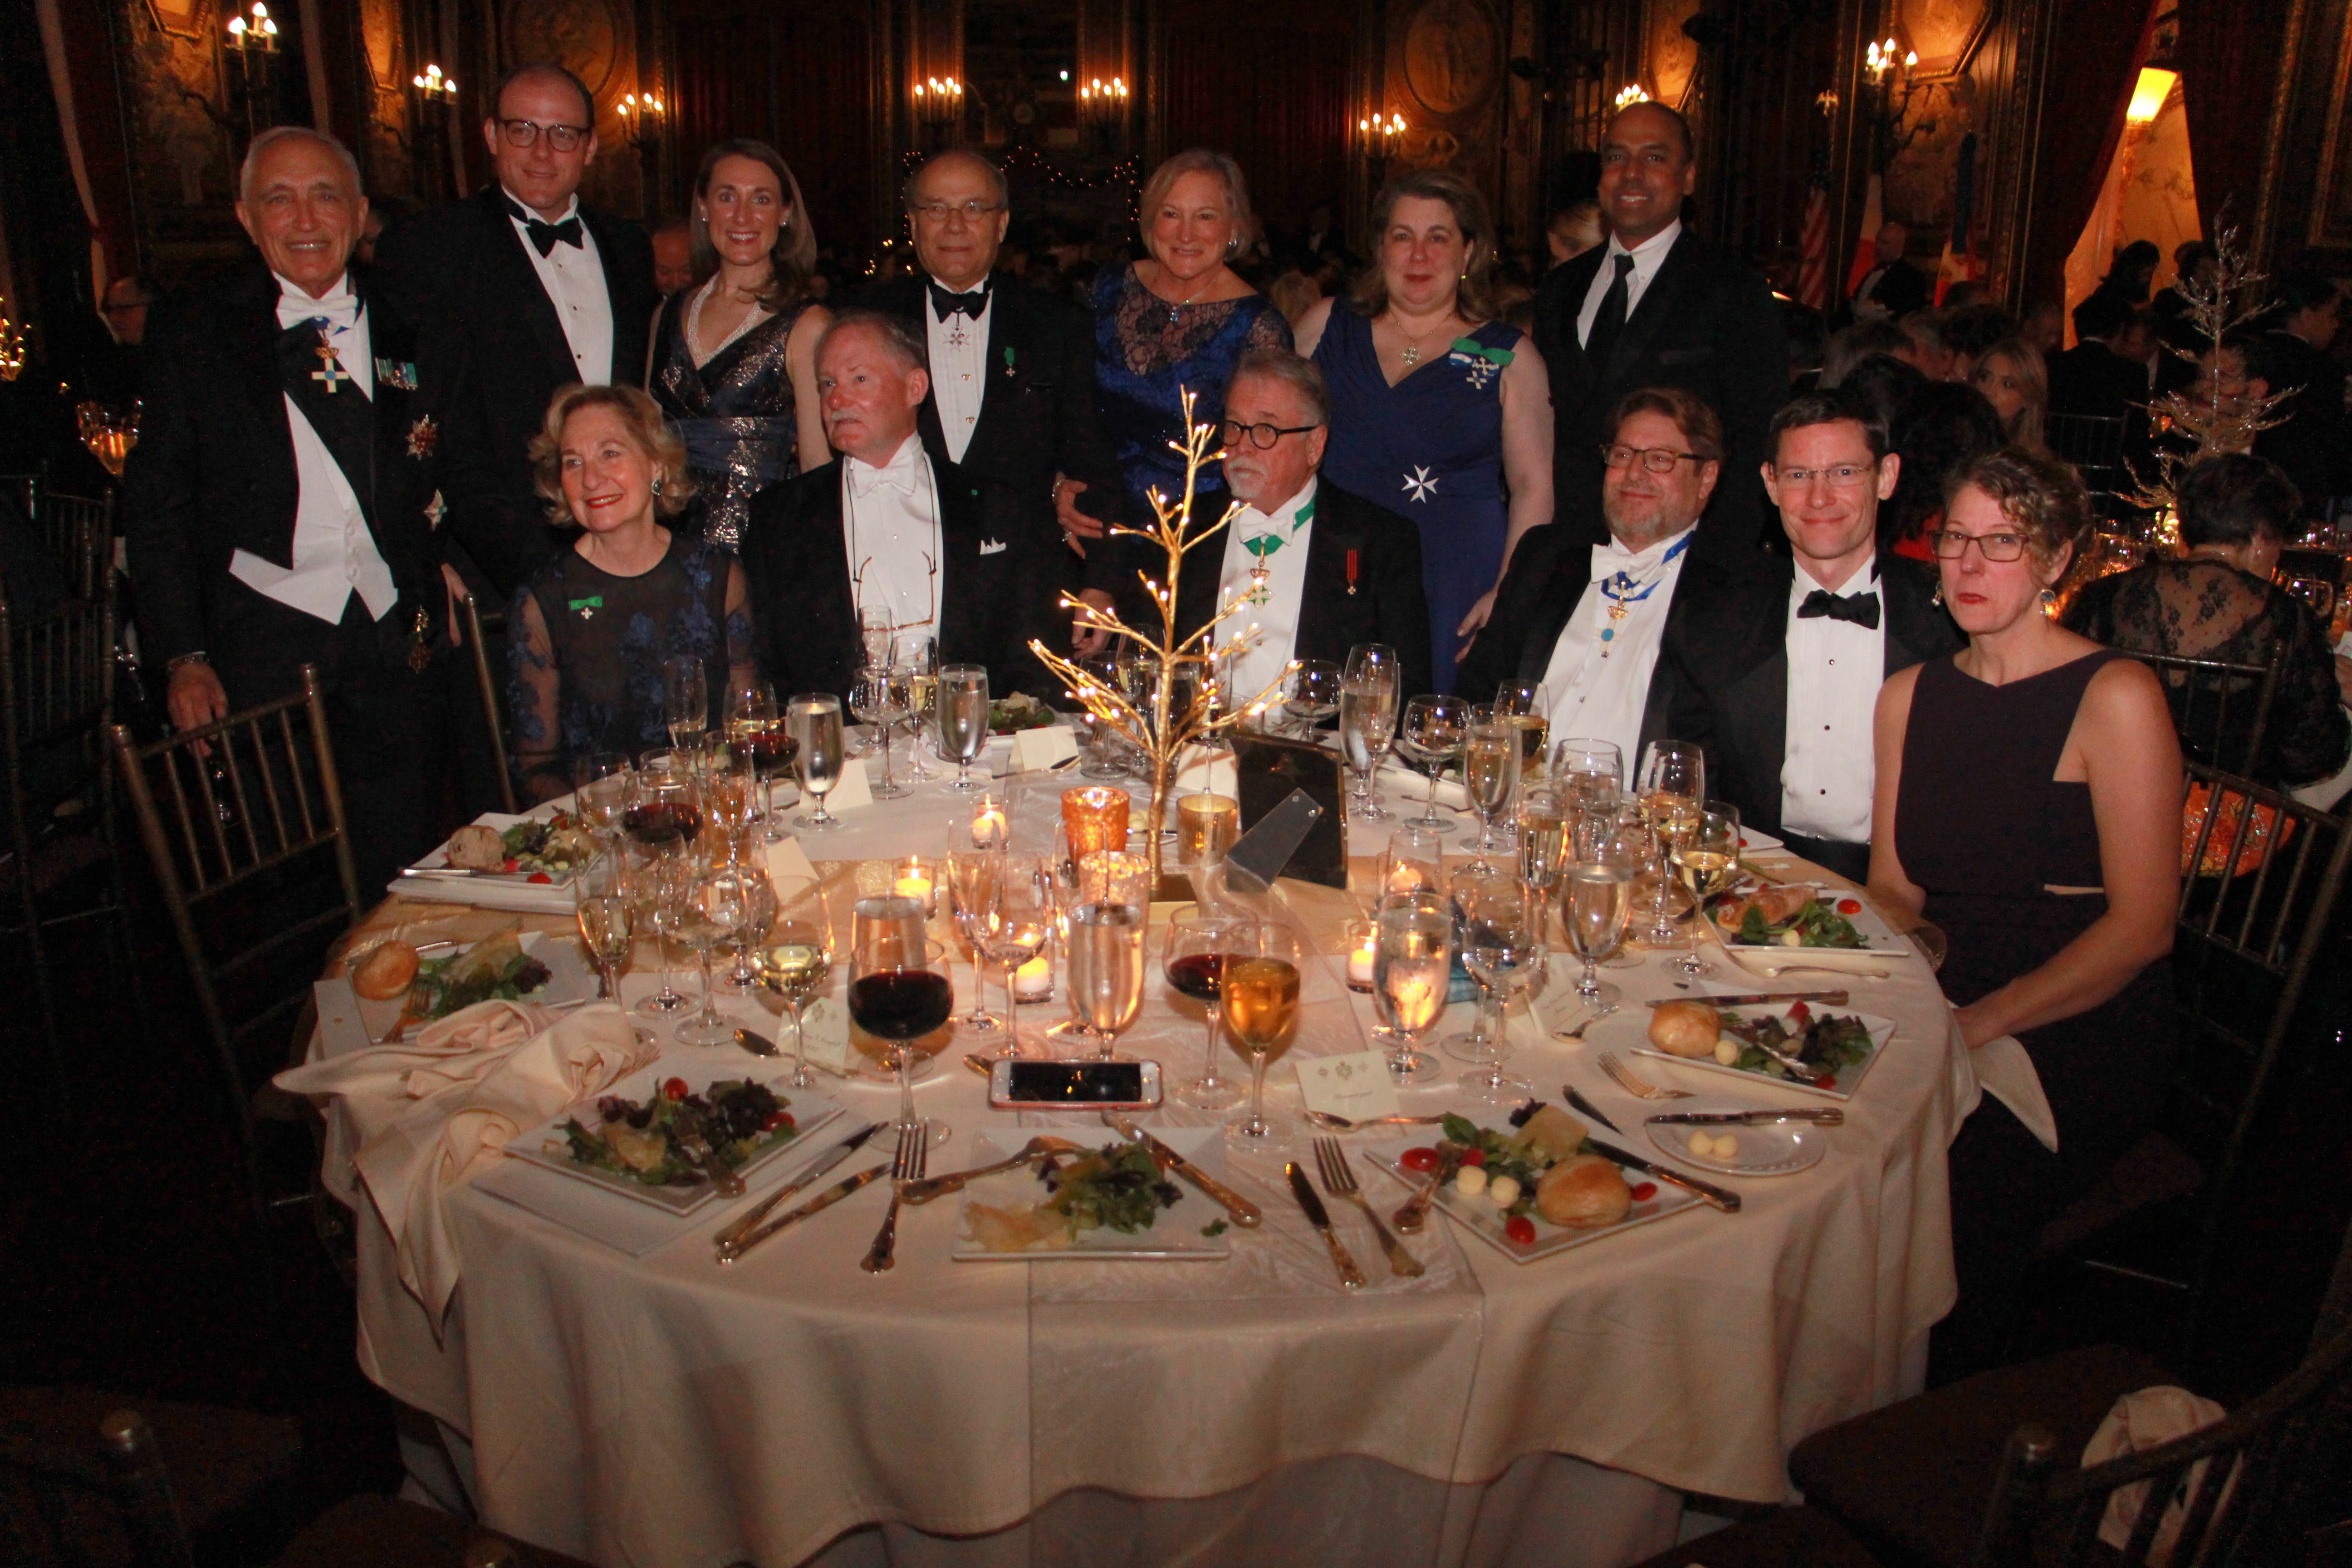 Savoy Ball Table of The Hon. Ernest Wayne Bachus  and Dr. Catherine Stevenson, Regional Representatives of the American Delegation of Savoy Orders in Texas